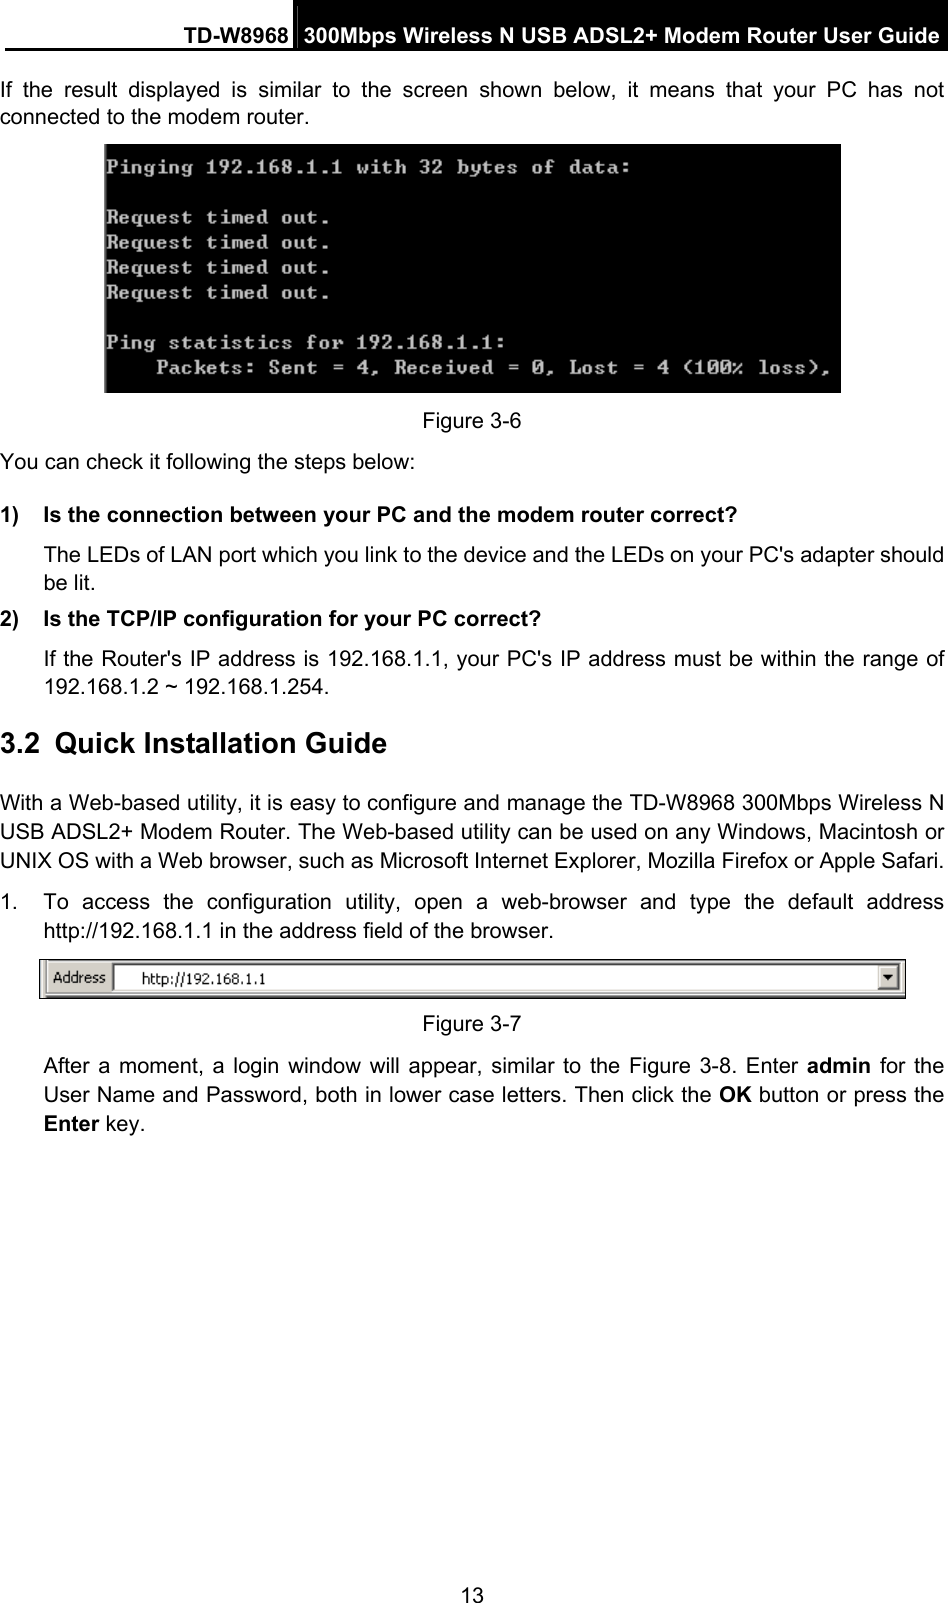 TD-W8968  300Mbps Wireless N USB ADSL2+ Modem Router User Guide 13 If the result displayed is similar to the screen shown below, it means that your PC has not connected to the modem router.  Figure 3-6 You can check it following the steps below: 1)  Is the connection between your PC and the modem router correct? The LEDs of LAN port which you link to the device and the LEDs on your PC&apos;s adapter should be lit. 2)  Is the TCP/IP configuration for your PC correct? If the Router&apos;s IP address is 192.168.1.1, your PC&apos;s IP address must be within the range of 192.168.1.2 ~ 192.168.1.254. 3.2  Quick Installation Guide With a Web-based utility, it is easy to configure and manage the TD-W8968 300Mbps Wireless N USB ADSL2+ Modem Router. The Web-based utility can be used on any Windows, Macintosh or UNIX OS with a Web browser, such as Microsoft Internet Explorer, Mozilla Firefox or Apple Safari. 1.  To access the configuration utility, open a web-browser and type the default address http://192.168.1.1 in the address field of the browser.  Figure 3-7 After a moment, a login window will appear, similar to the Figure 3-8. Enter admin  for the User Name and Password, both in lower case letters. Then click the OK button or press the Enter key. 